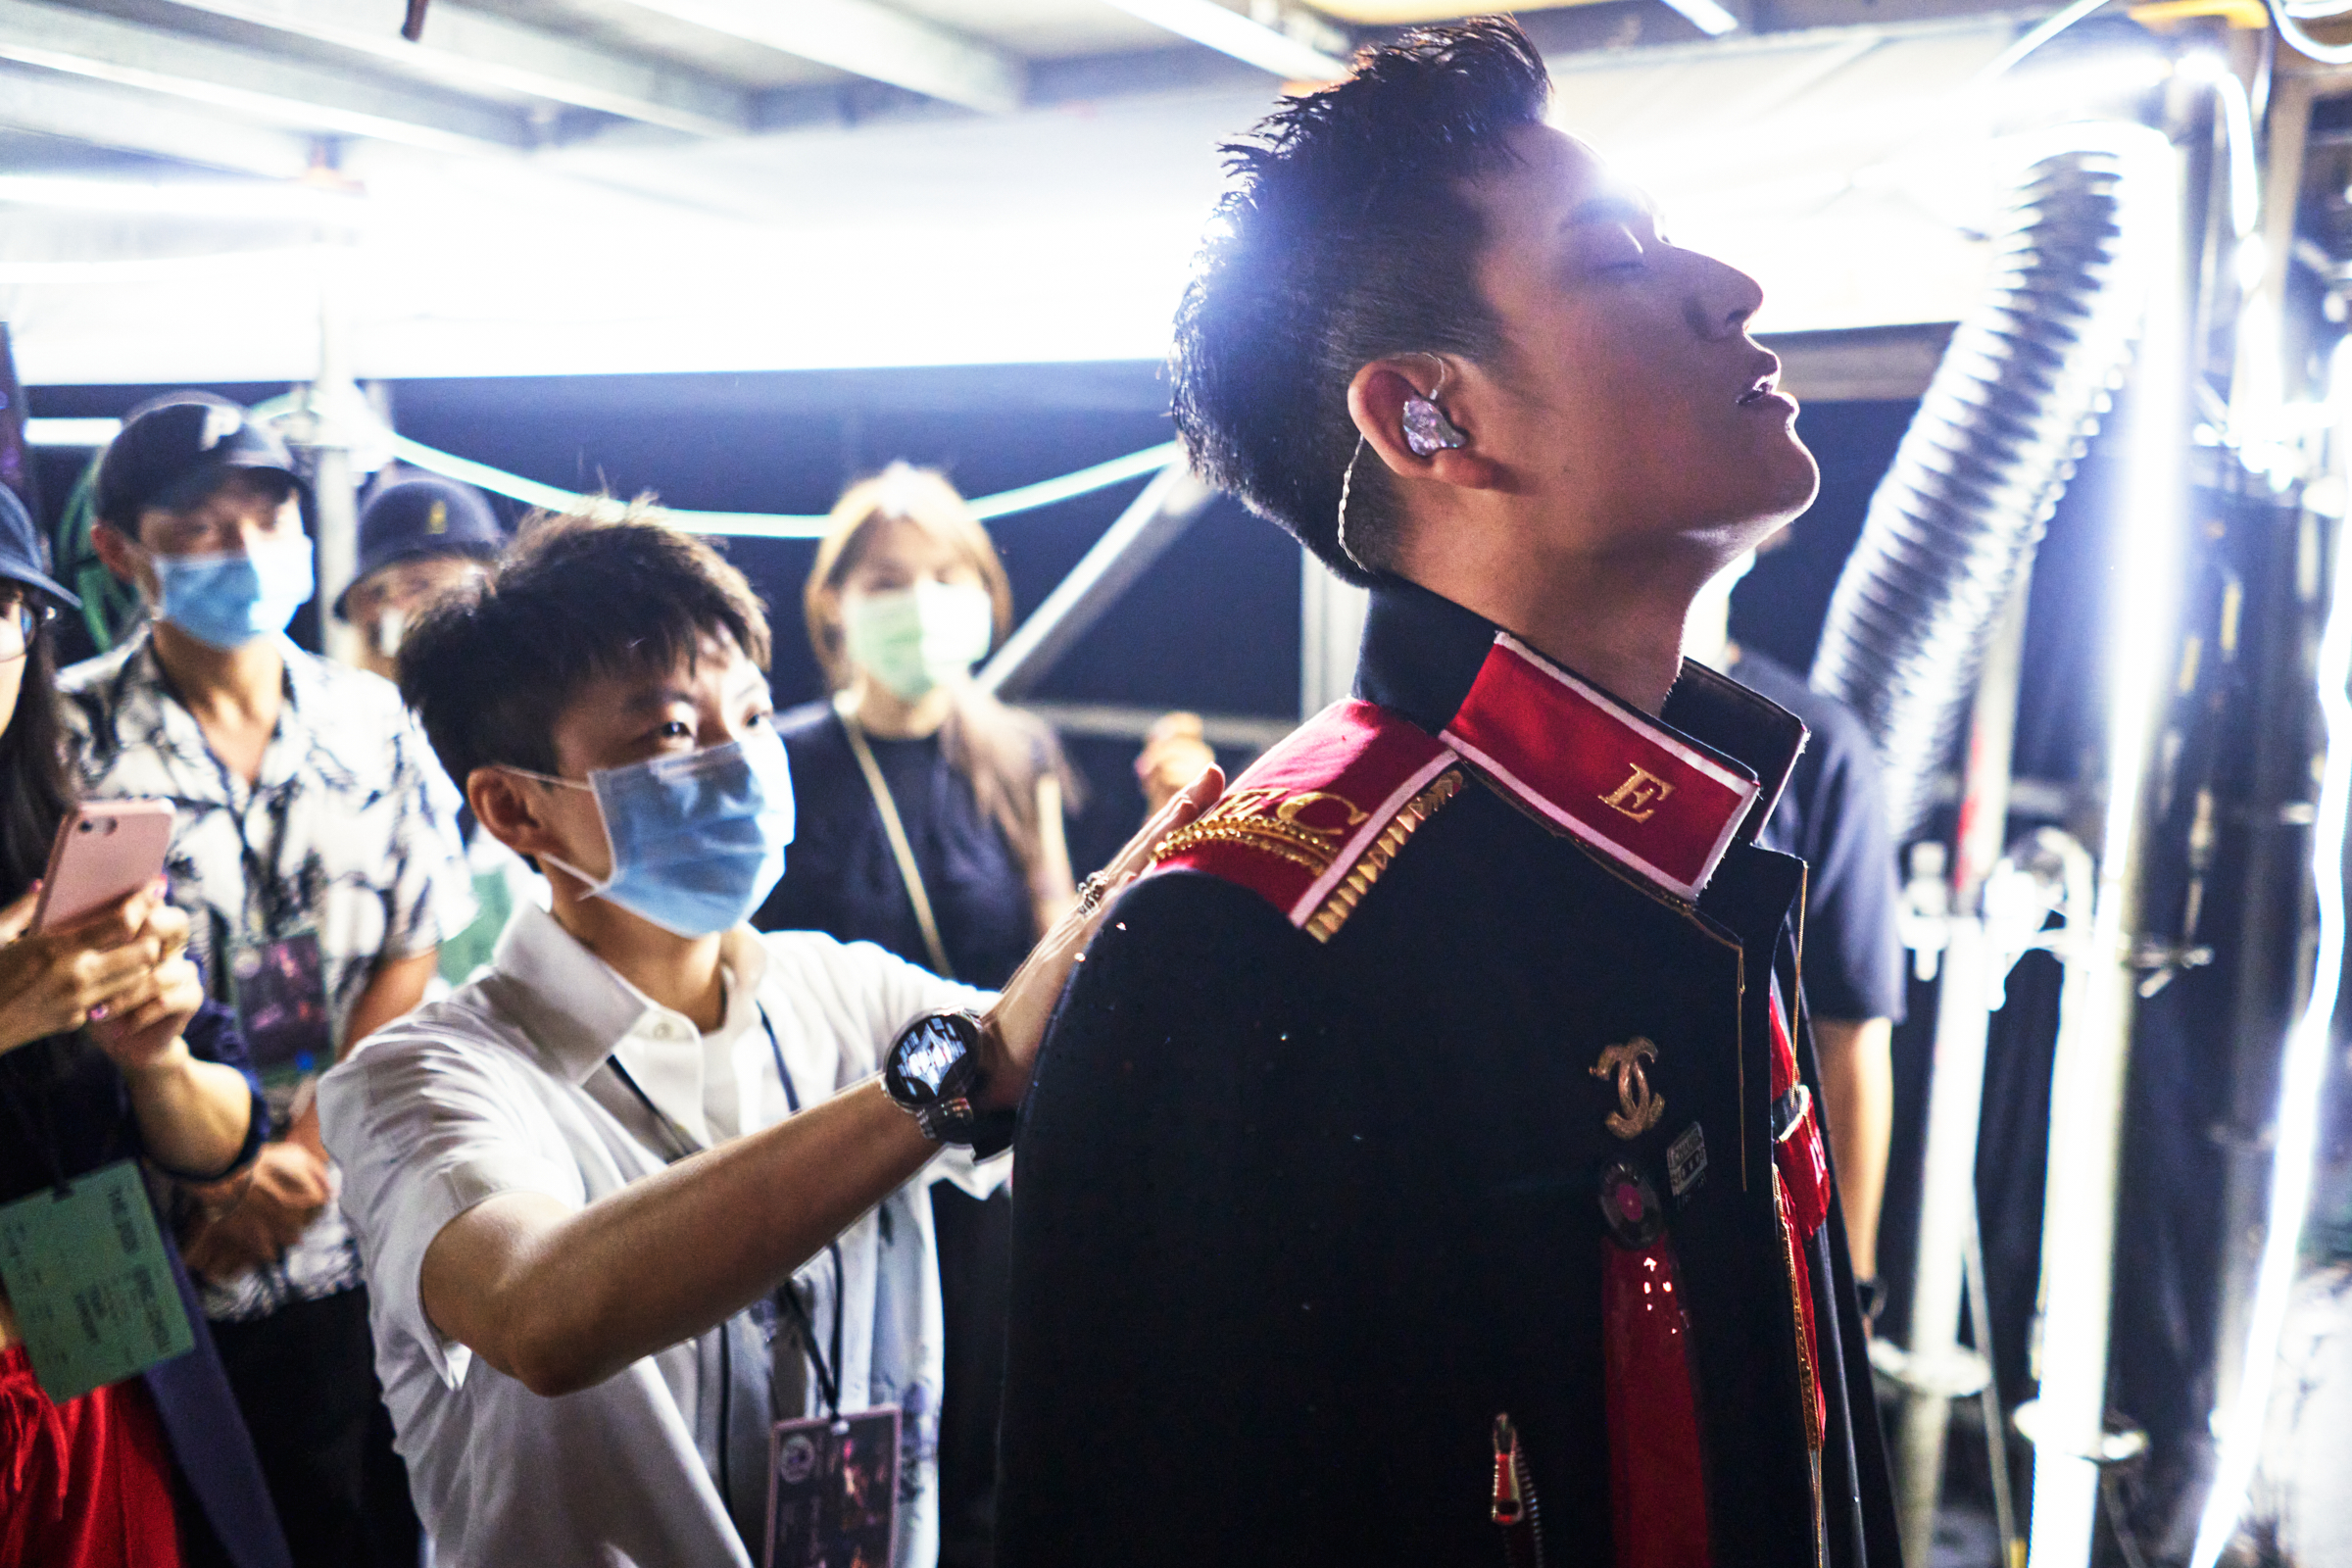 Chou receives finishing touches from his manager Reese Hsu before going onstage to perform for more than 10,000 fans